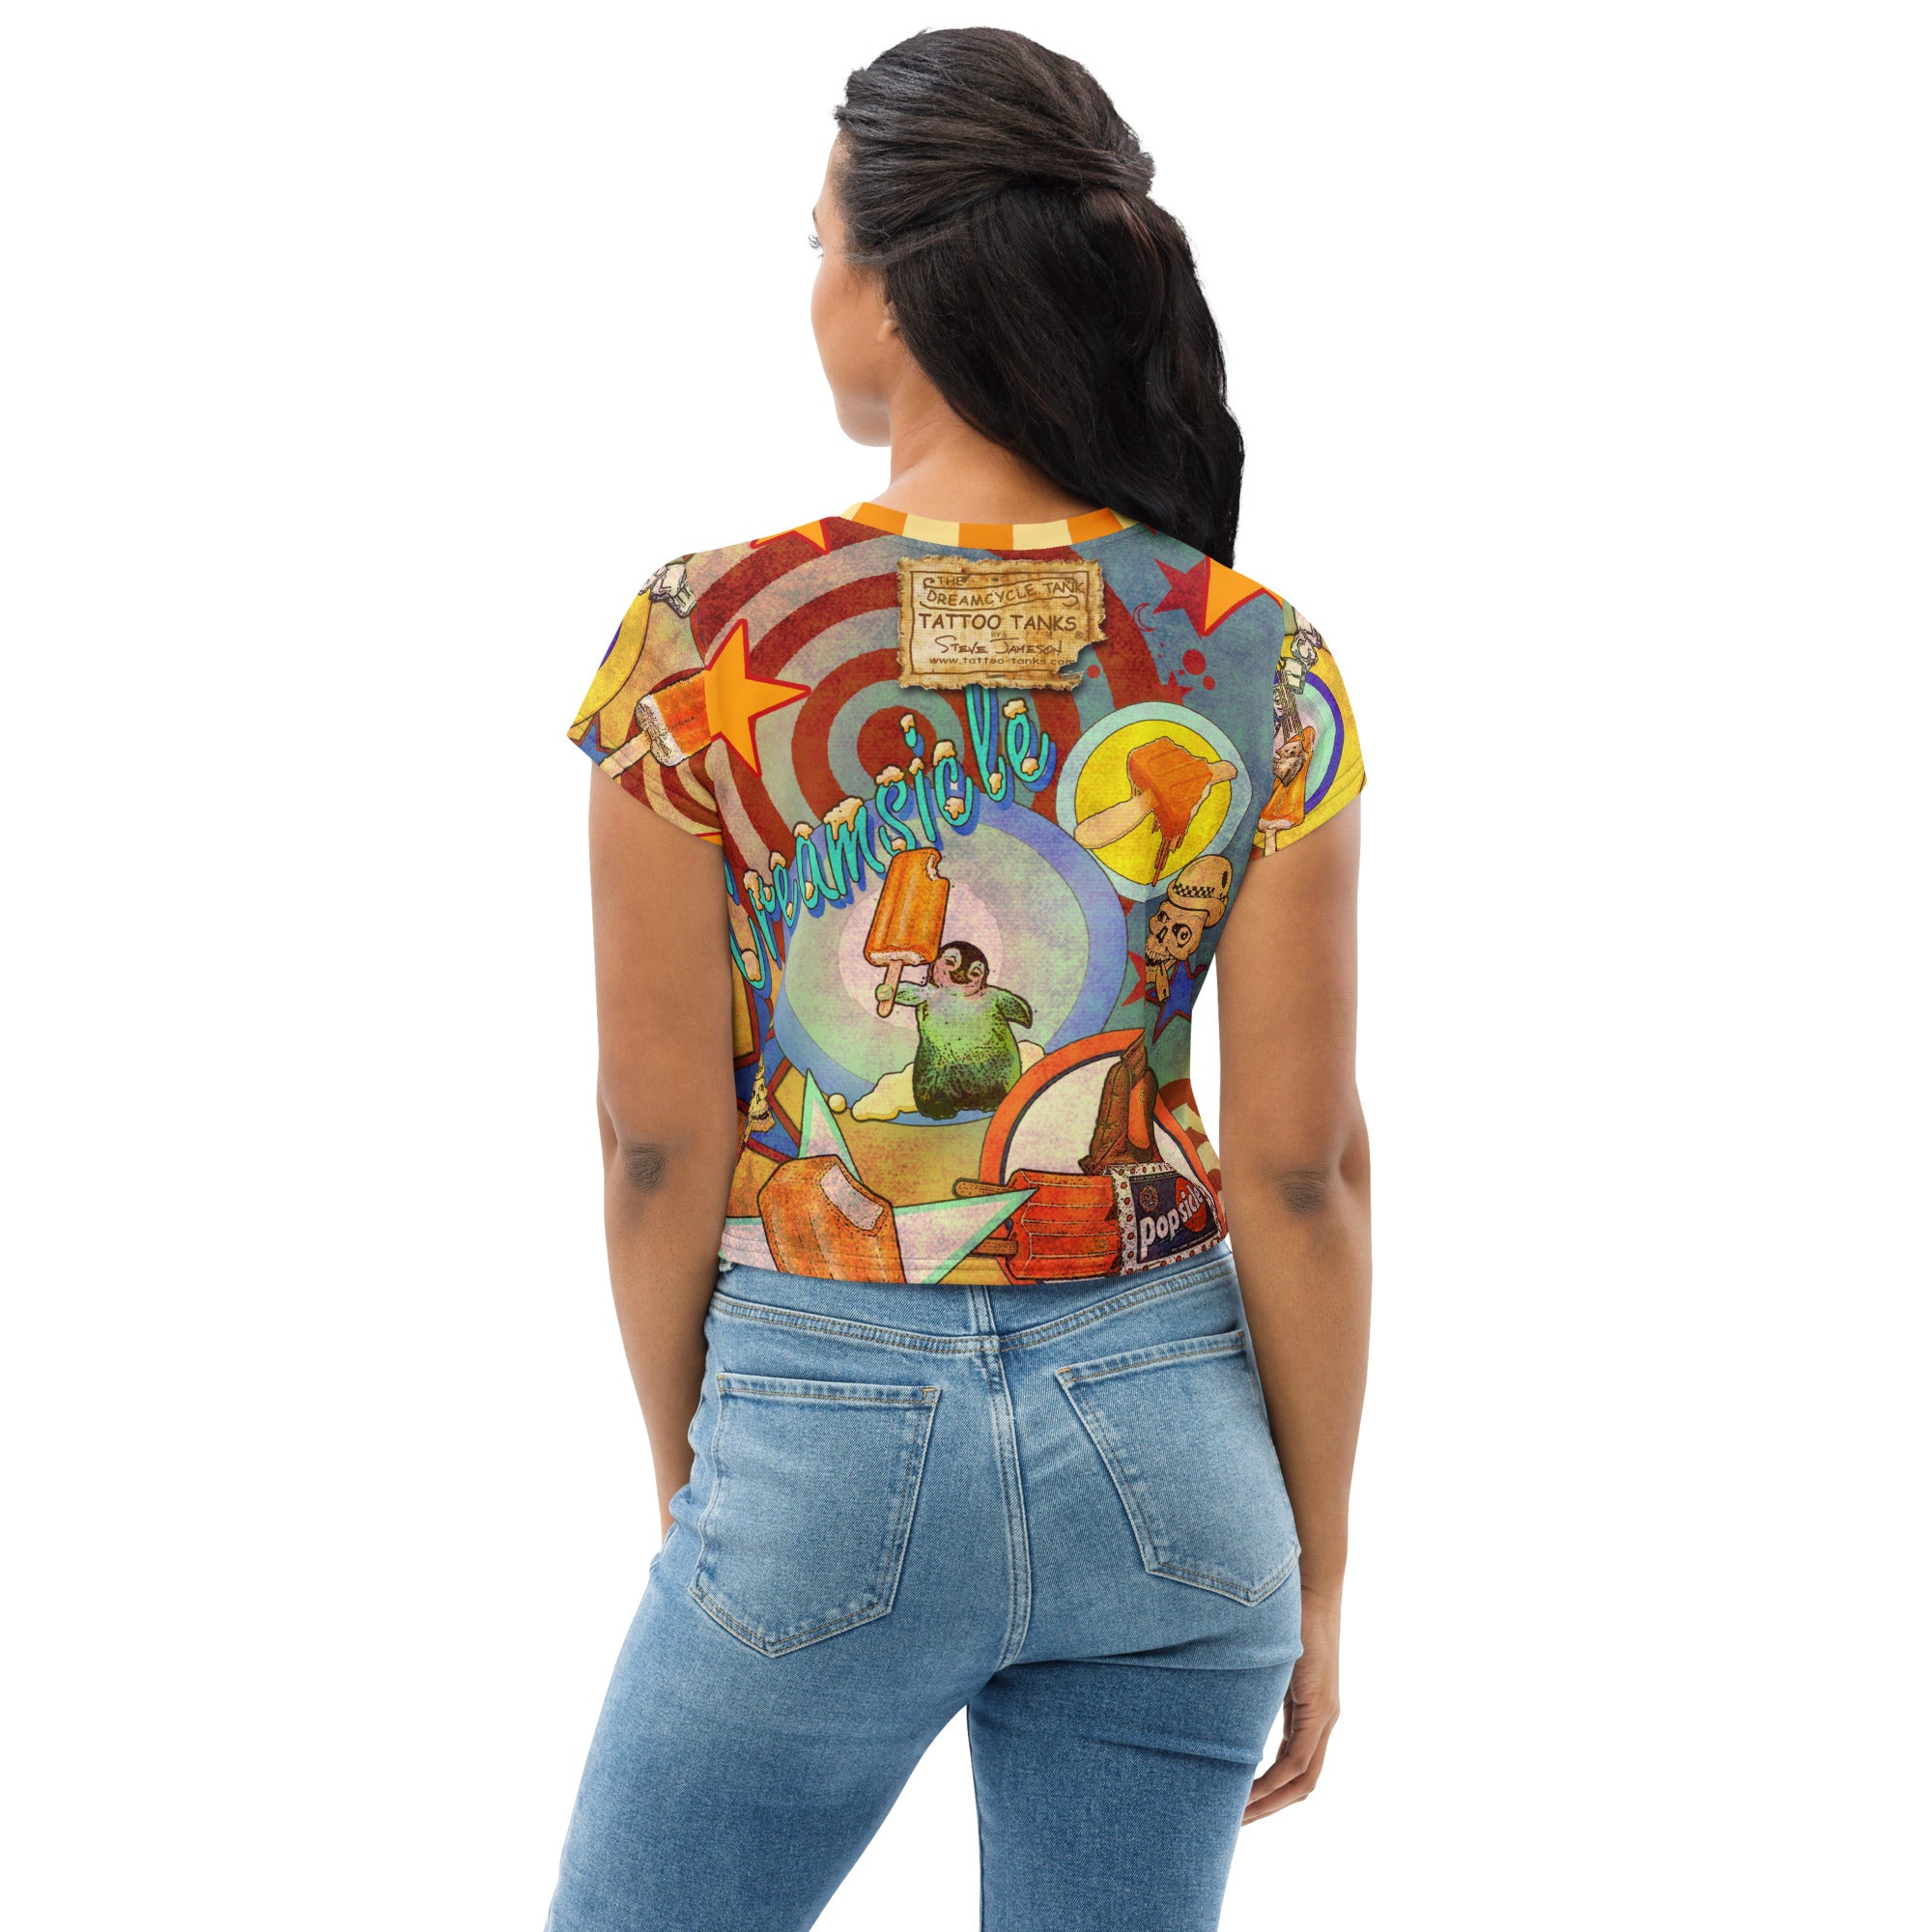 "THE CREAMSICLE TATTOO CROP TOP" for women